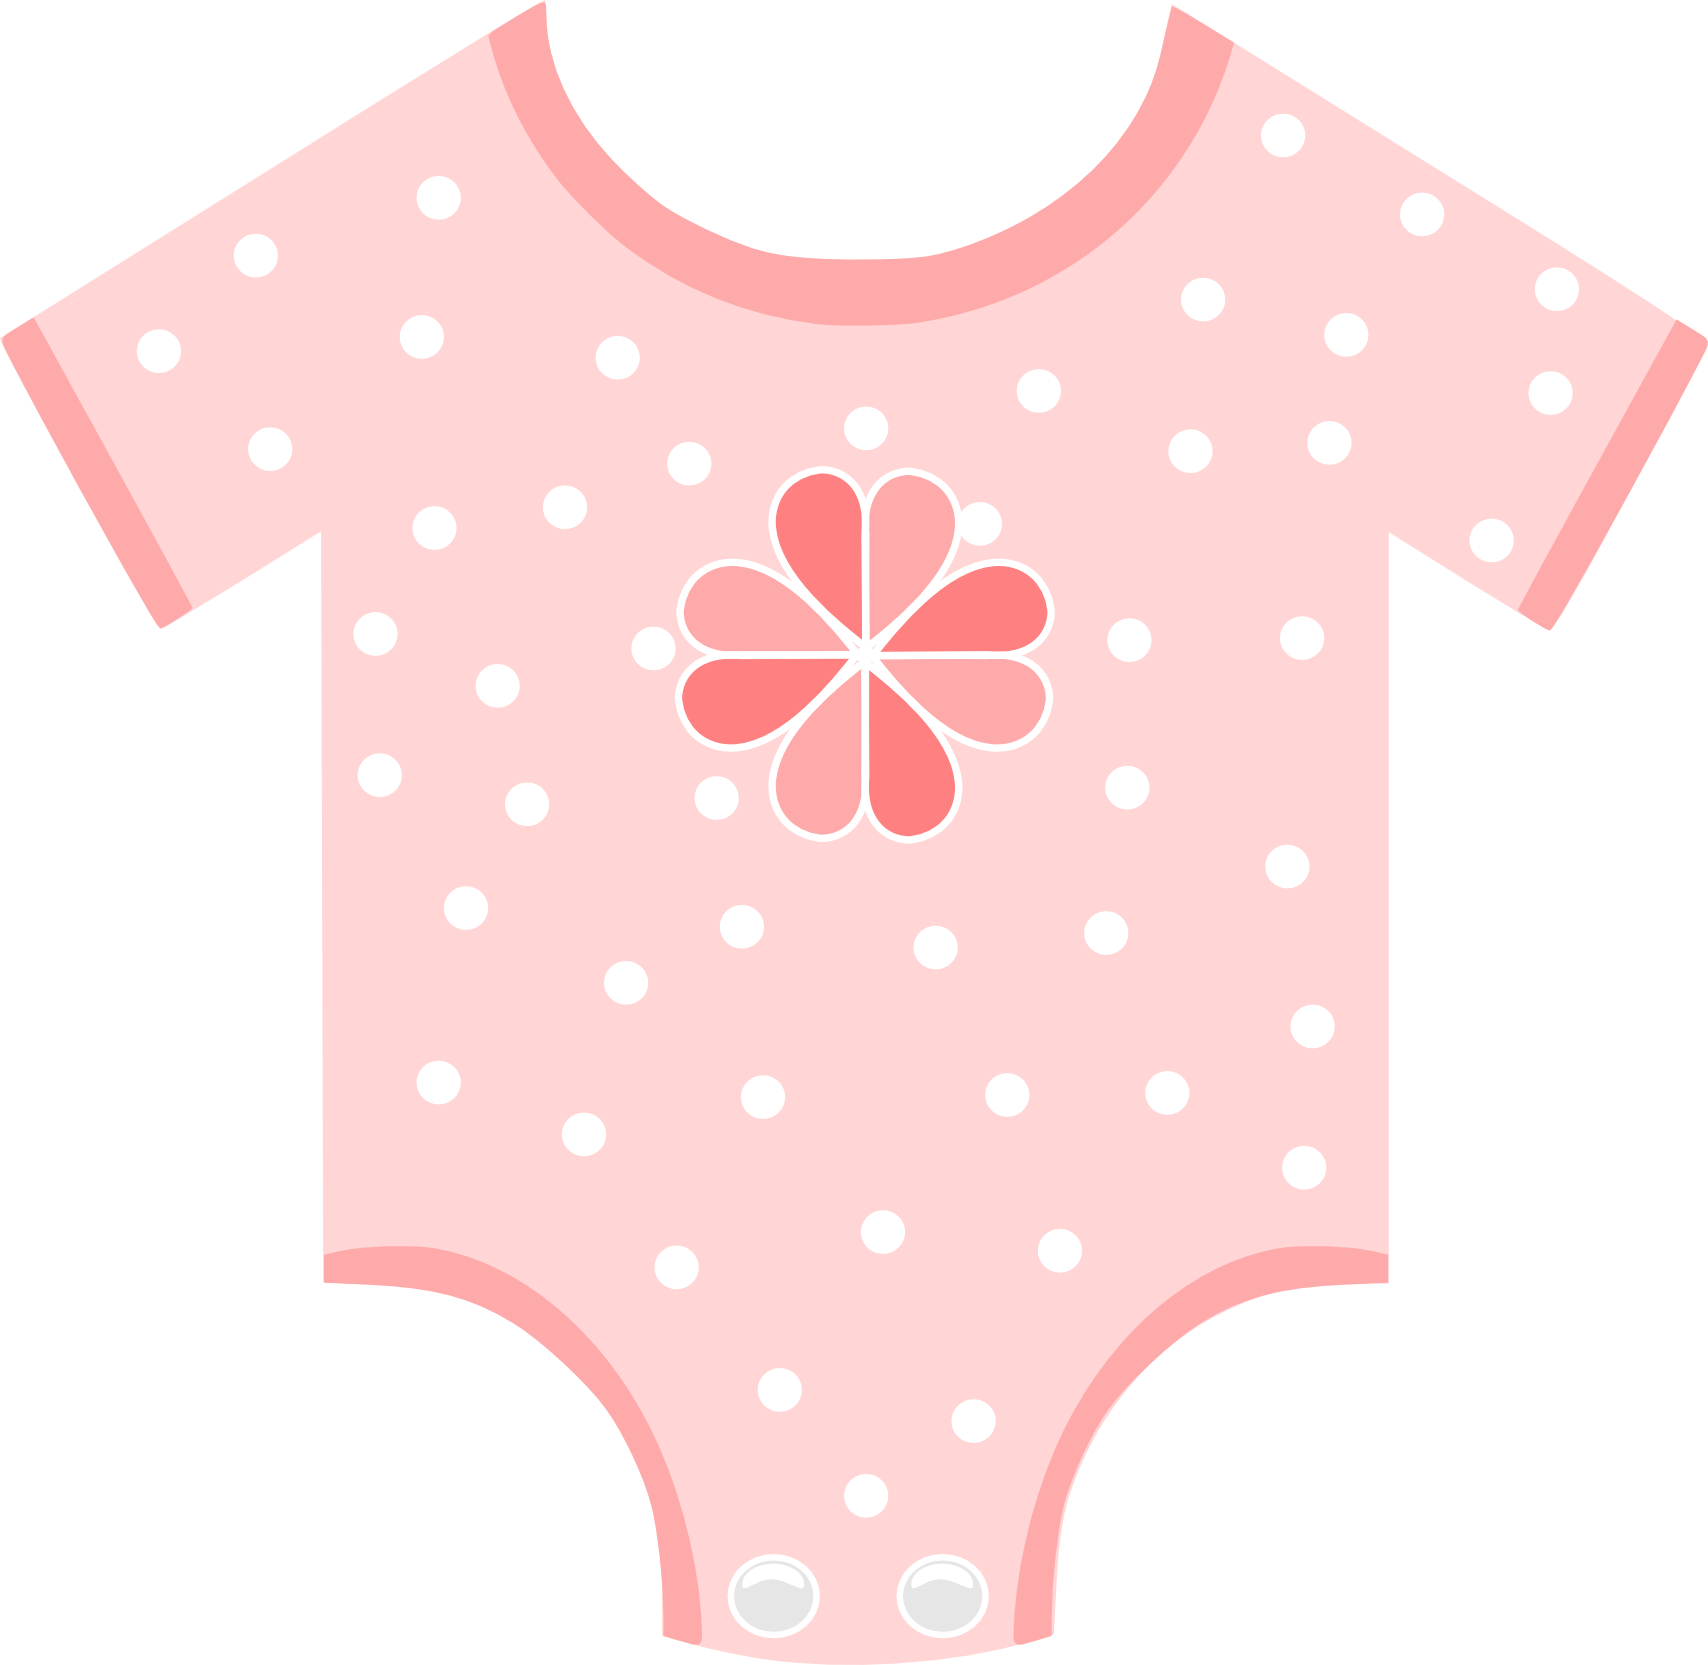 Baby Clothing Clip Art - Transparent Background Baby Clipart Png (1708x1665)